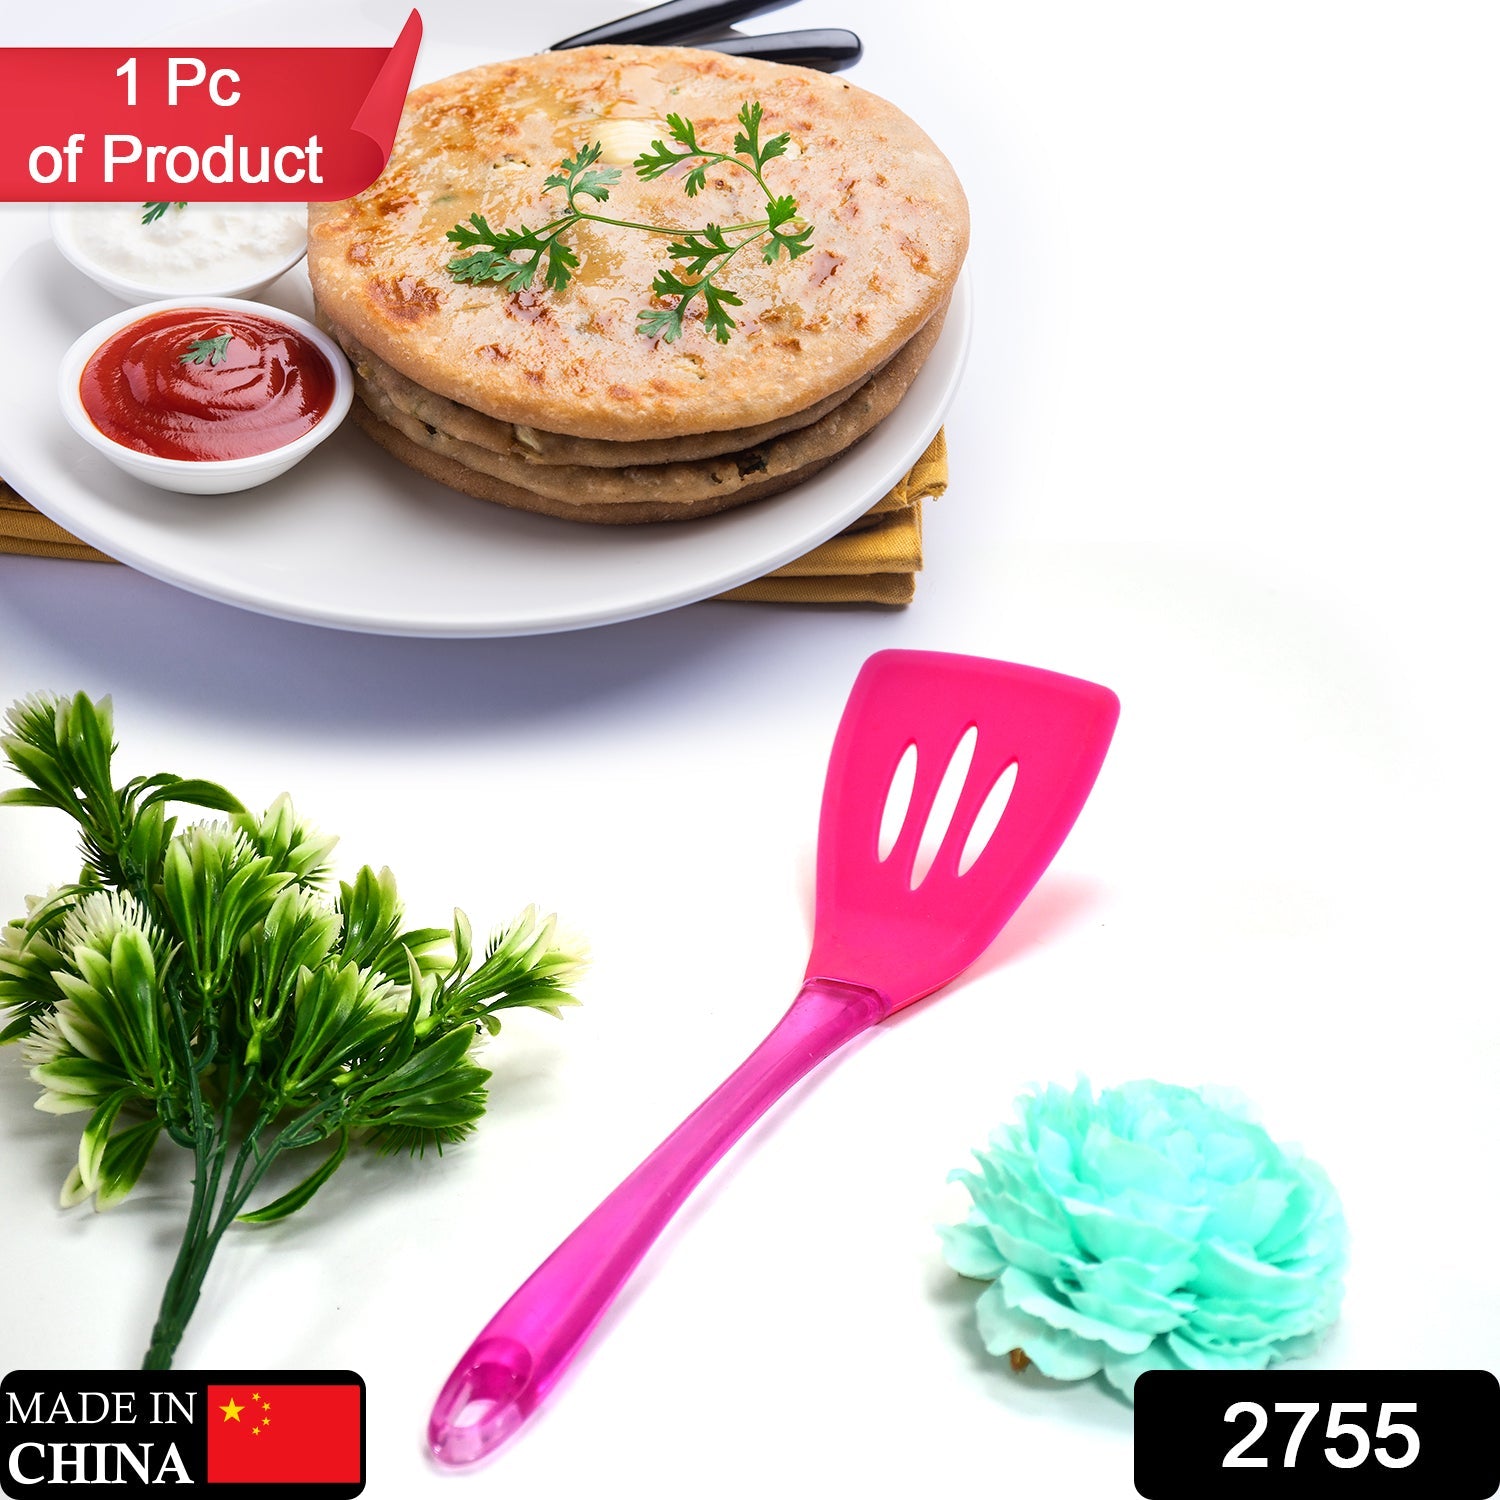 2755 KITCHEN TURNER HEAT RESISTANT SILICONE NON-STICK SILICONE TURNER GRIP WITH LONG HANDLE COOKING TURNER 